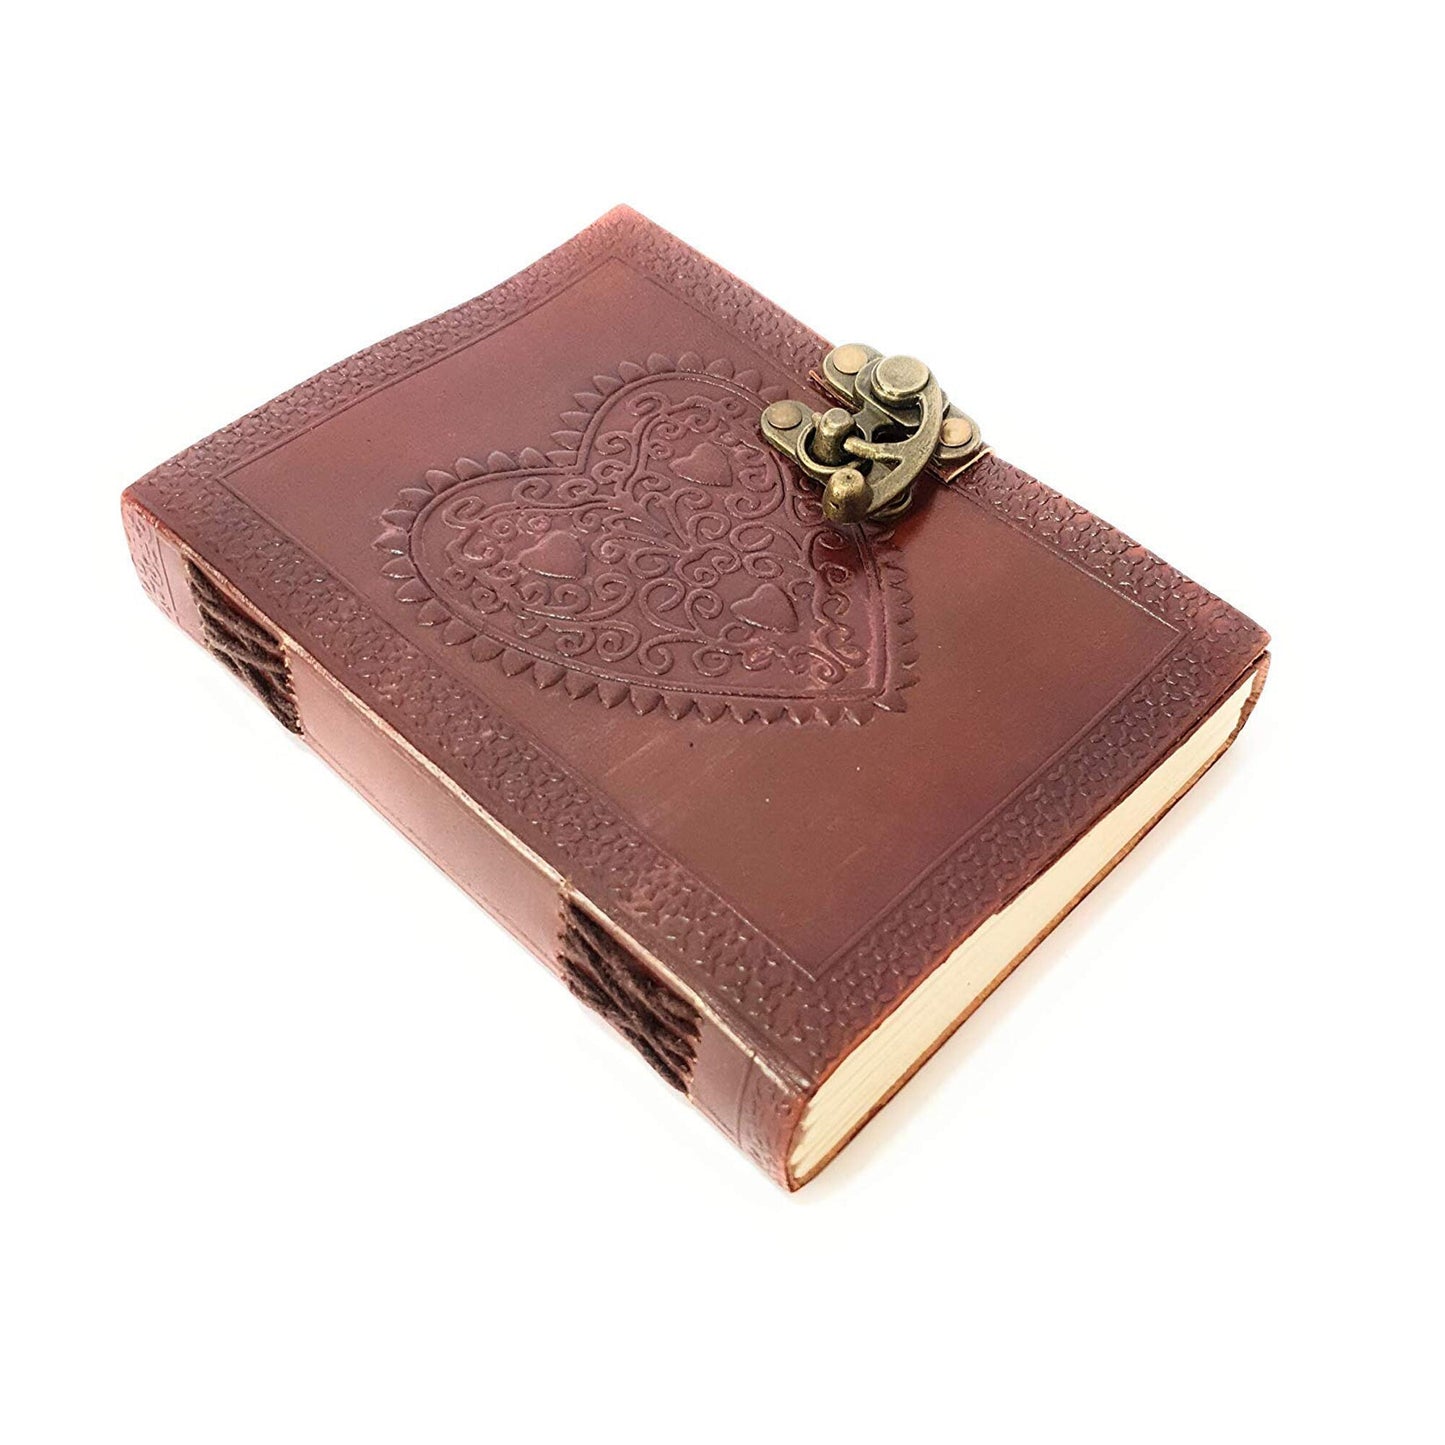 Genuine Leather Journal Heart Design Diary for Travel  C-lock Diary with Unlined Pages Vintage Travel Diary Christmas Gift